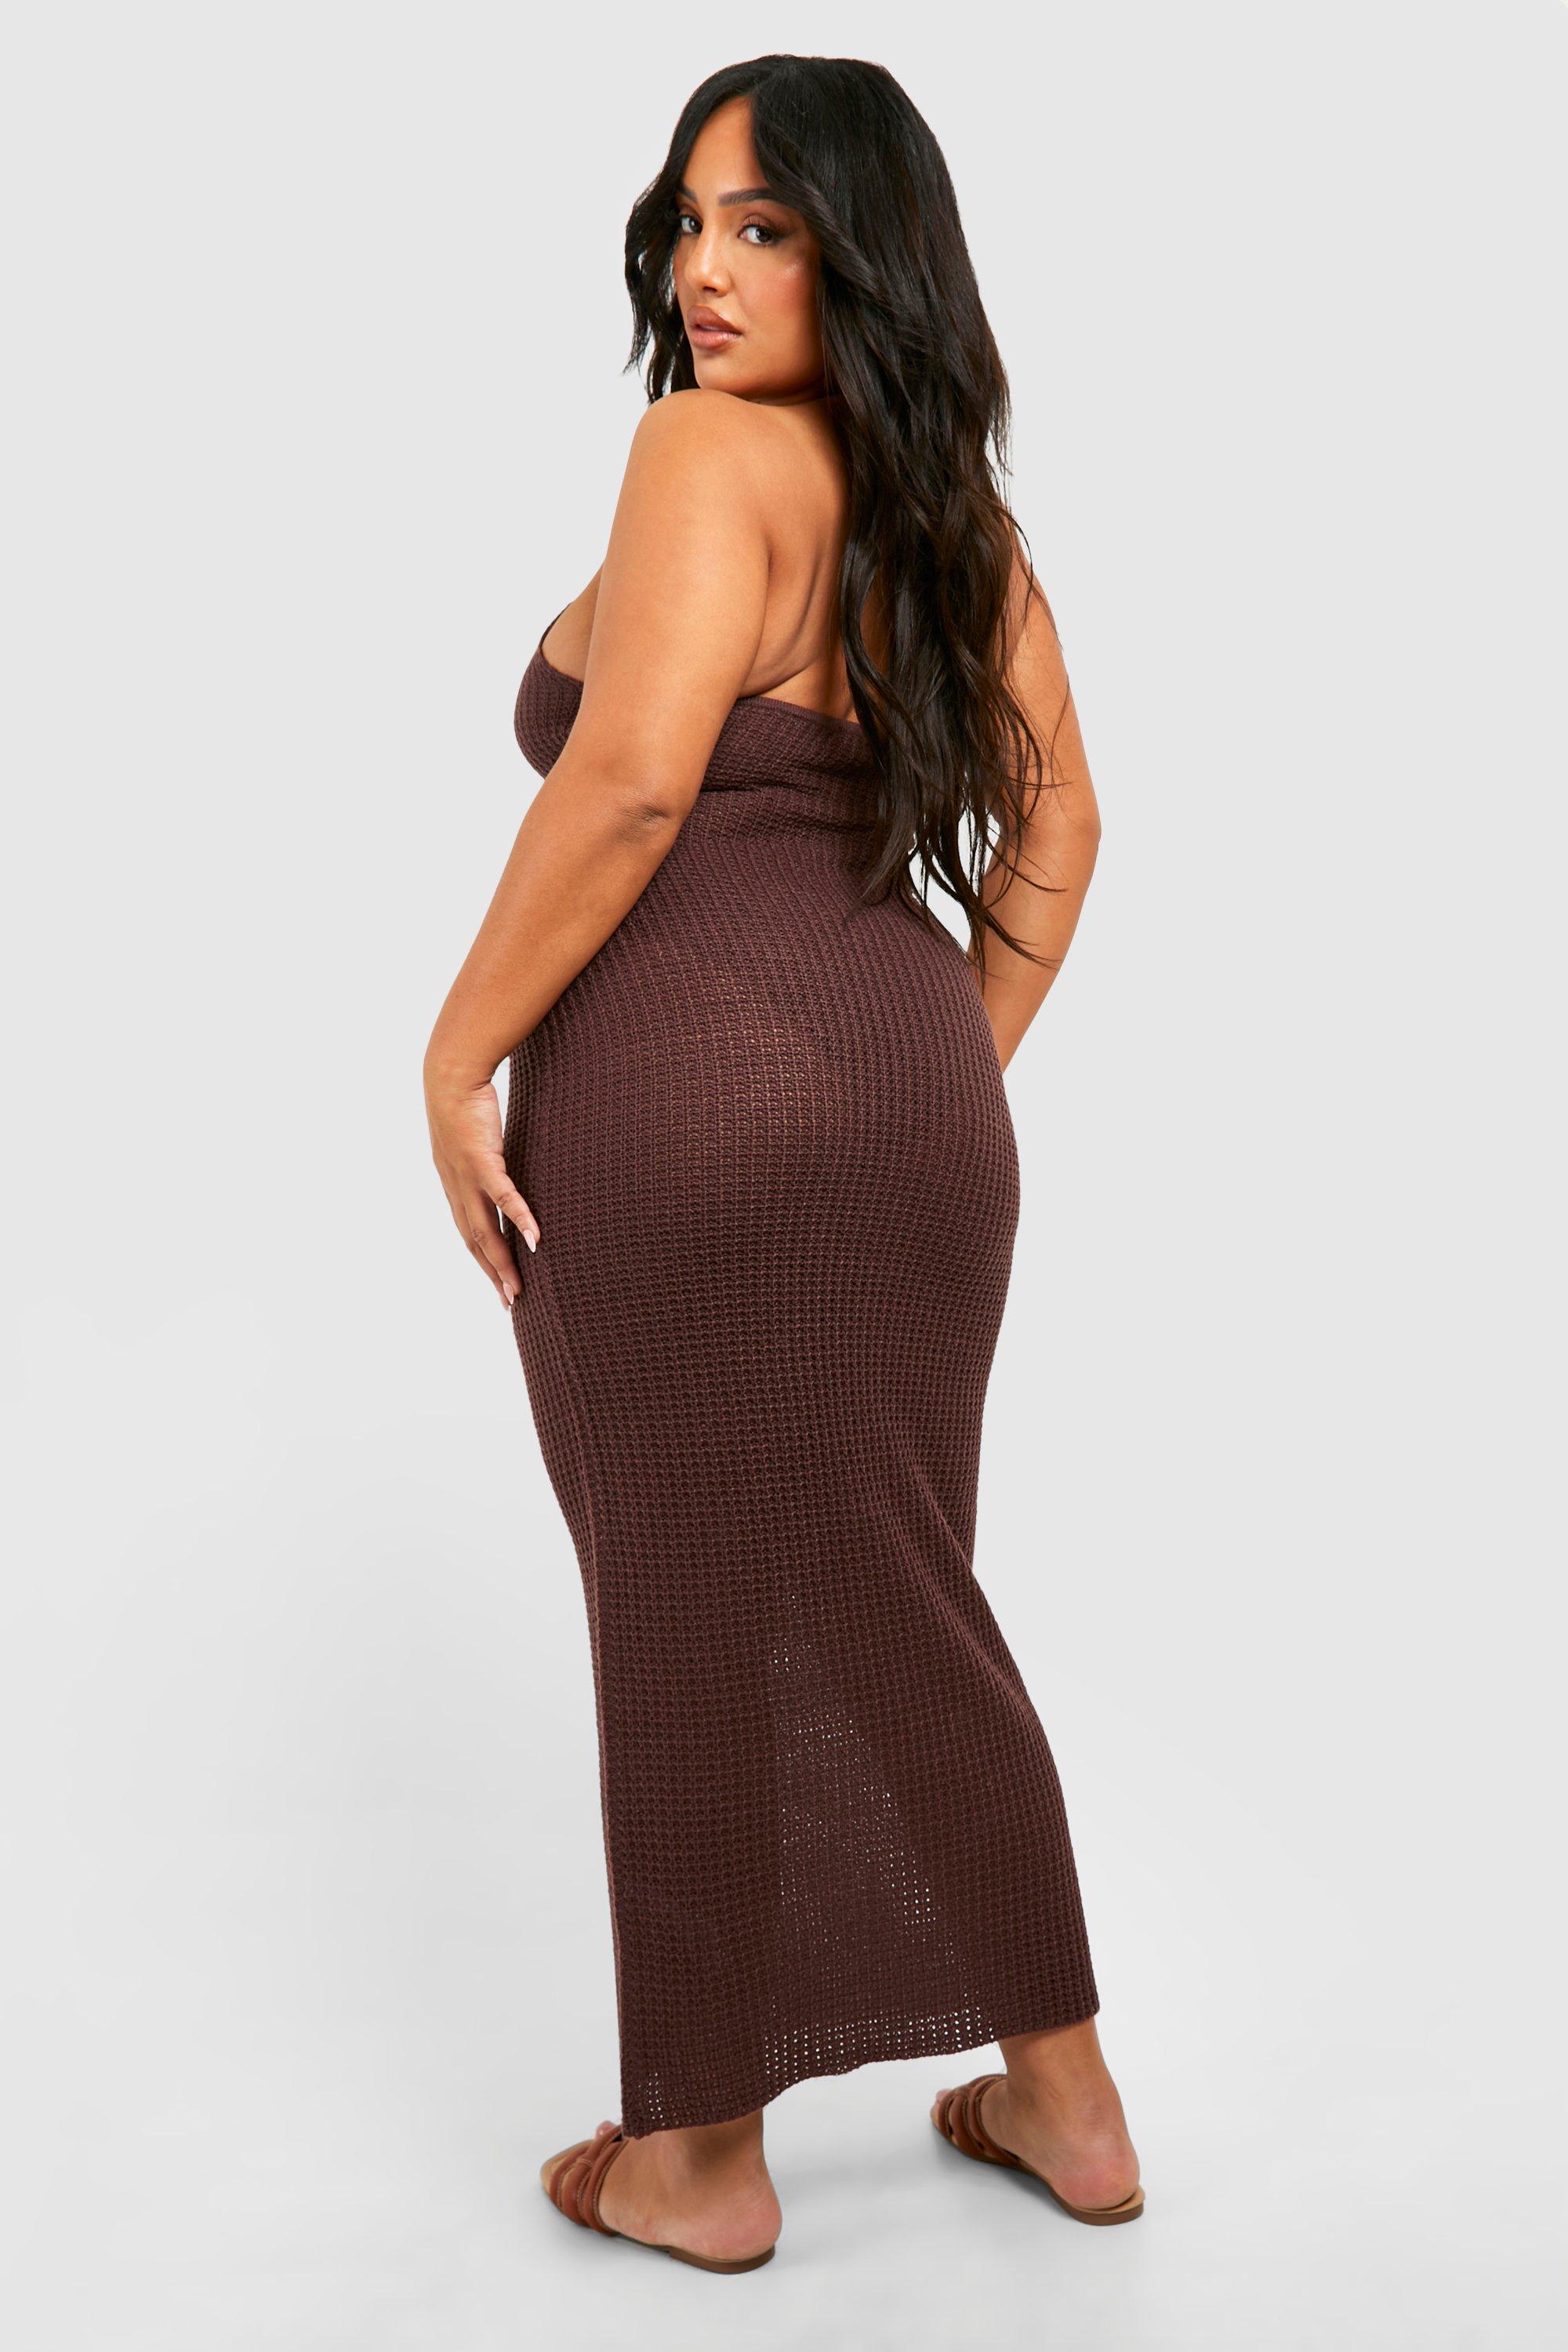 Crochet Halter Maxi Dress w/ Cut Outs by Elan - Chocolate Brown - Miss  Monroe Boutique